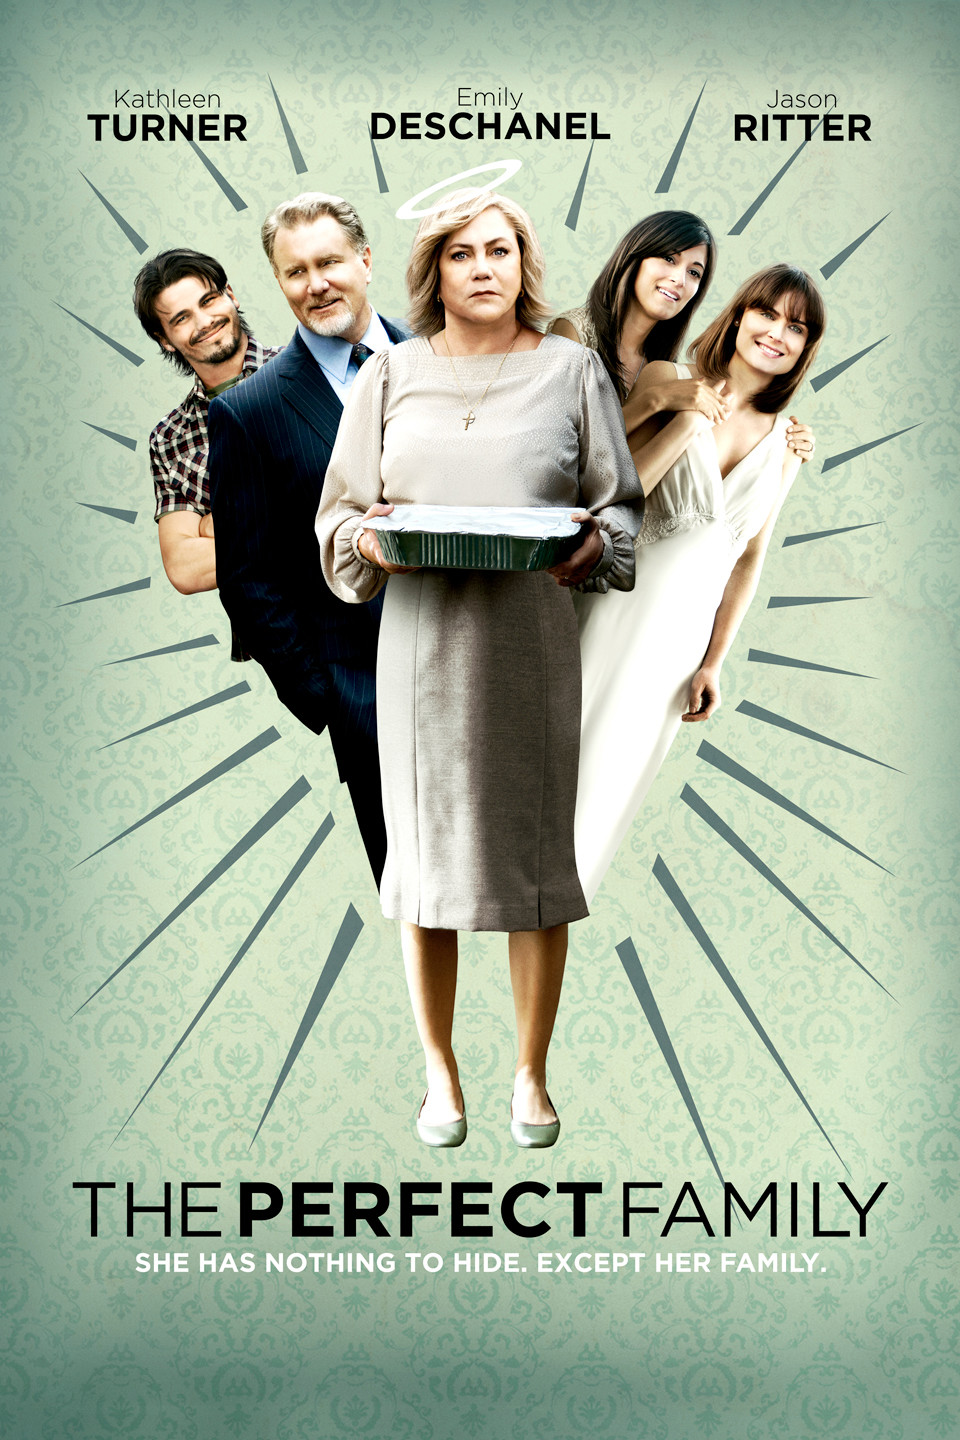 the family movie poster